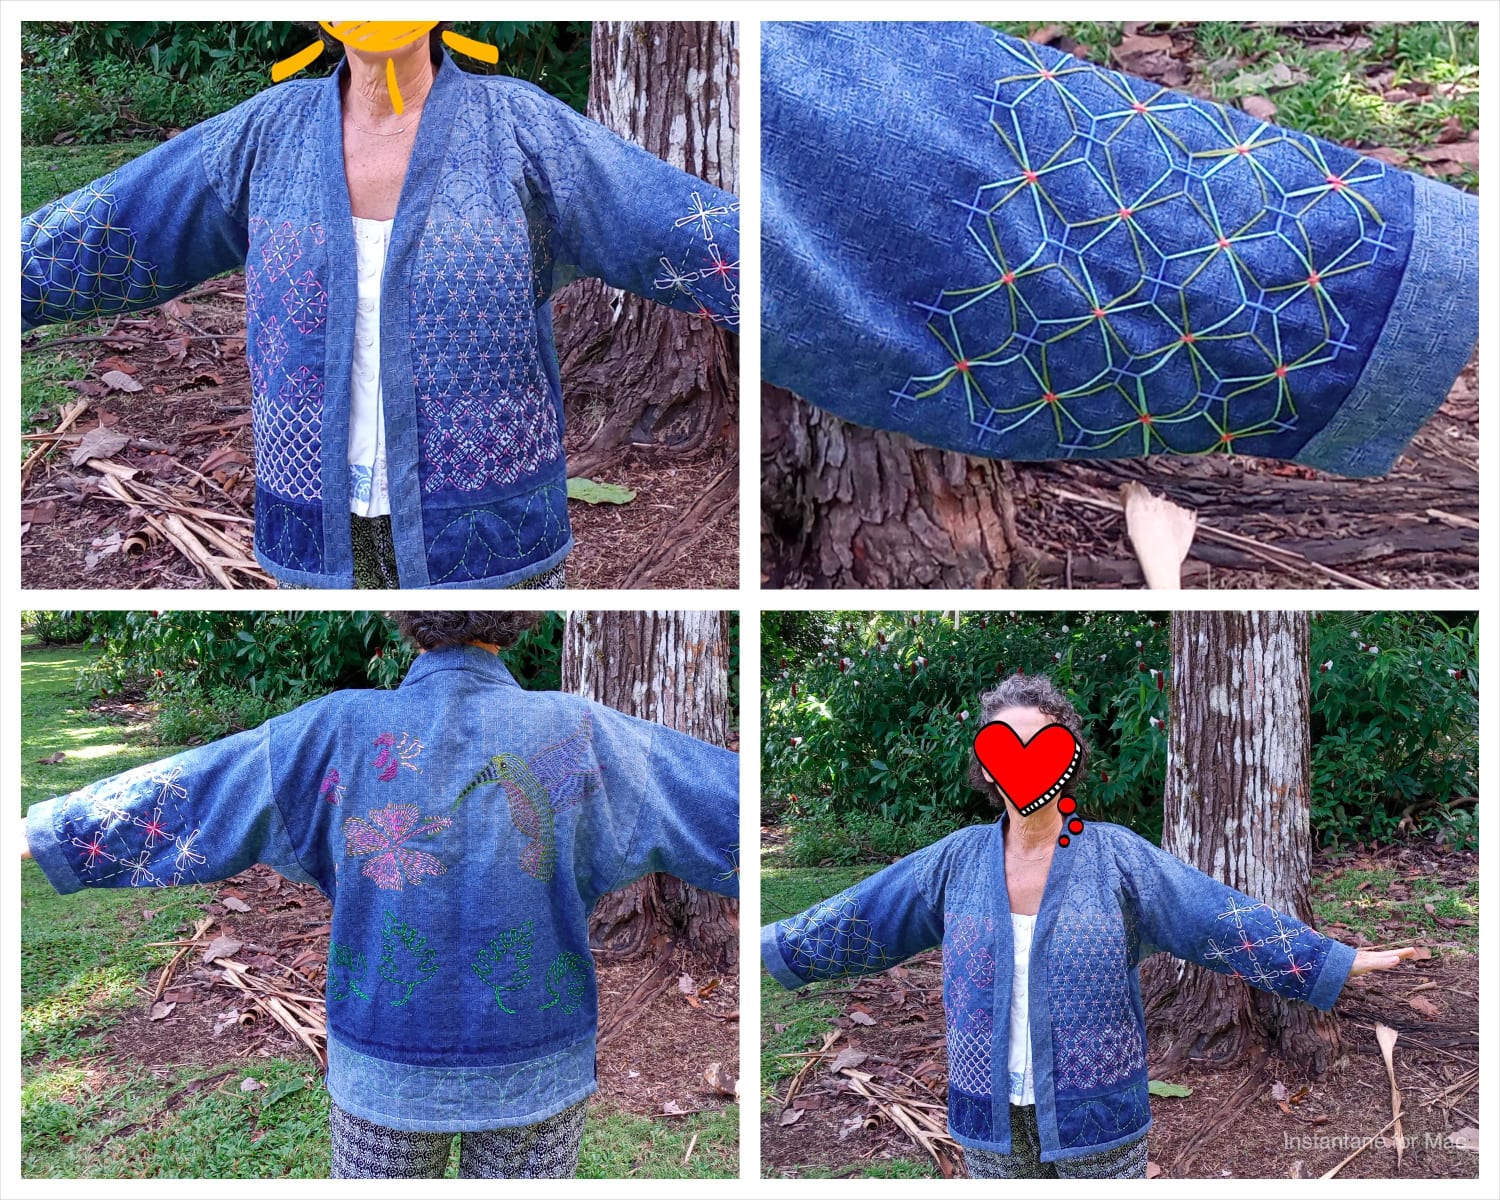 Corona Jacket with sashiko, I used an old denim couch cover to make it and lined it with quilting cotton. The stitches were done in sashiko running stitch with various designs. so relaxing to sew.